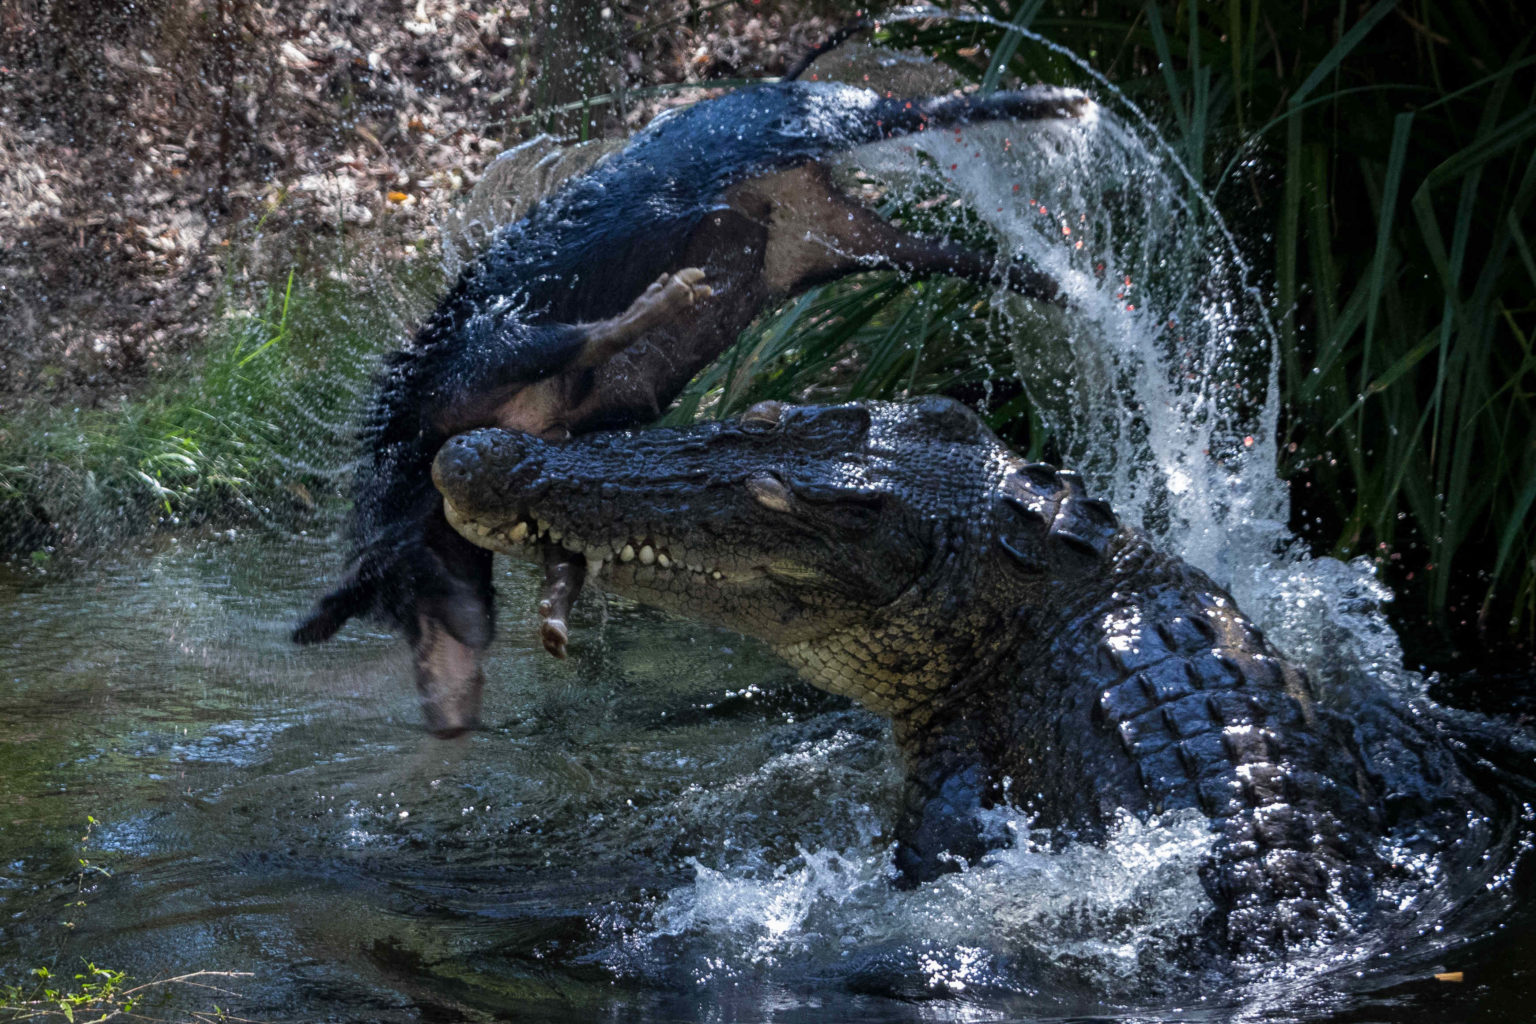 This Hungry Croc Sent A Pig Flying Before Ripping It Apart.